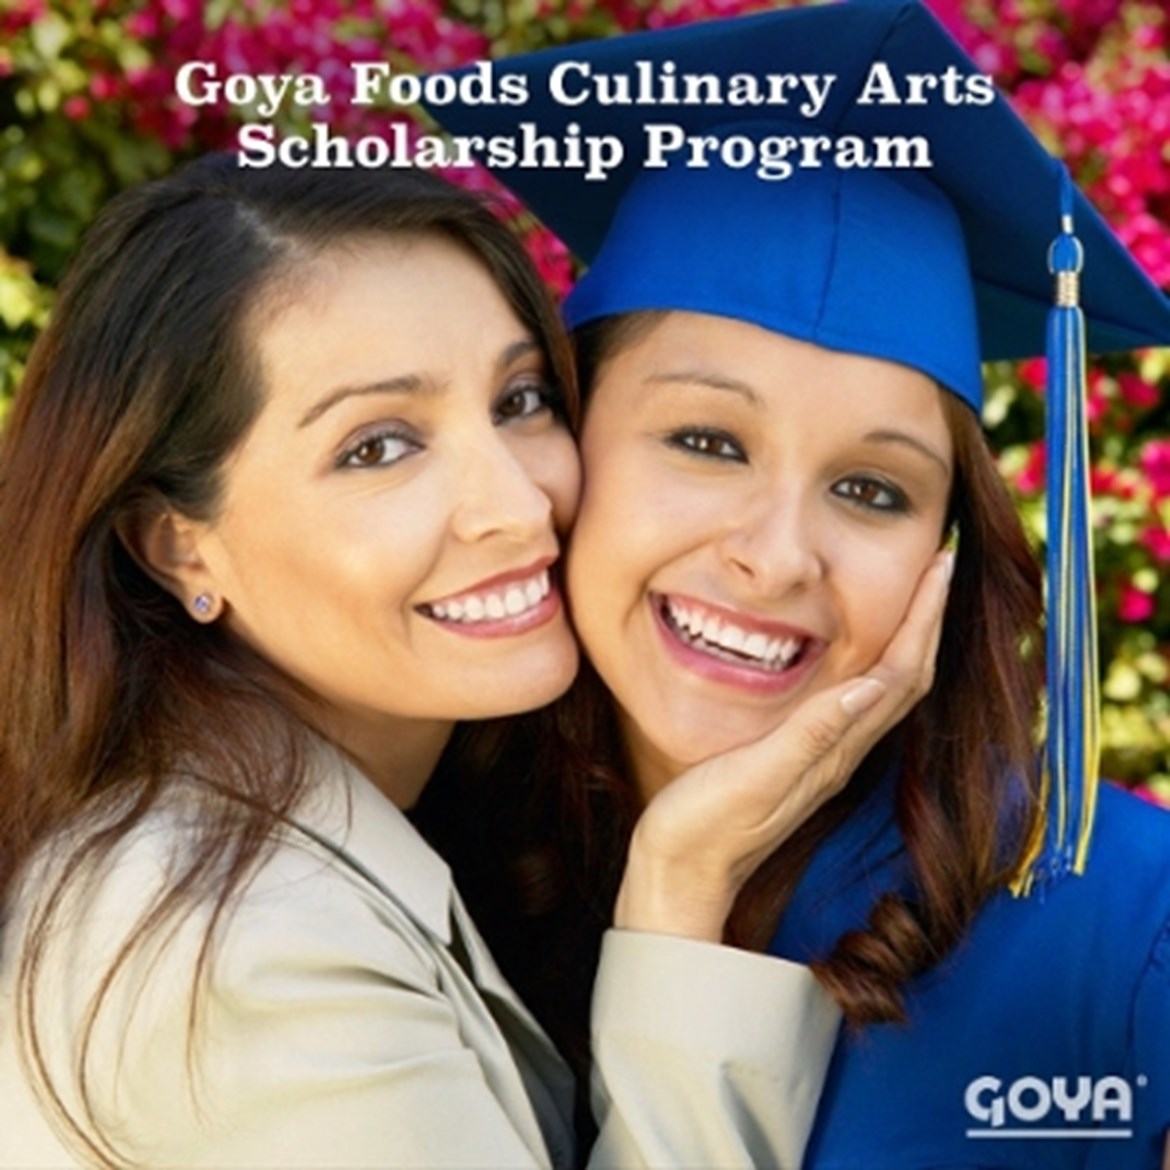 Press Release: Goya Foods Announces New Nationwide Culinary Arts & Food Sciences Scholarship Program